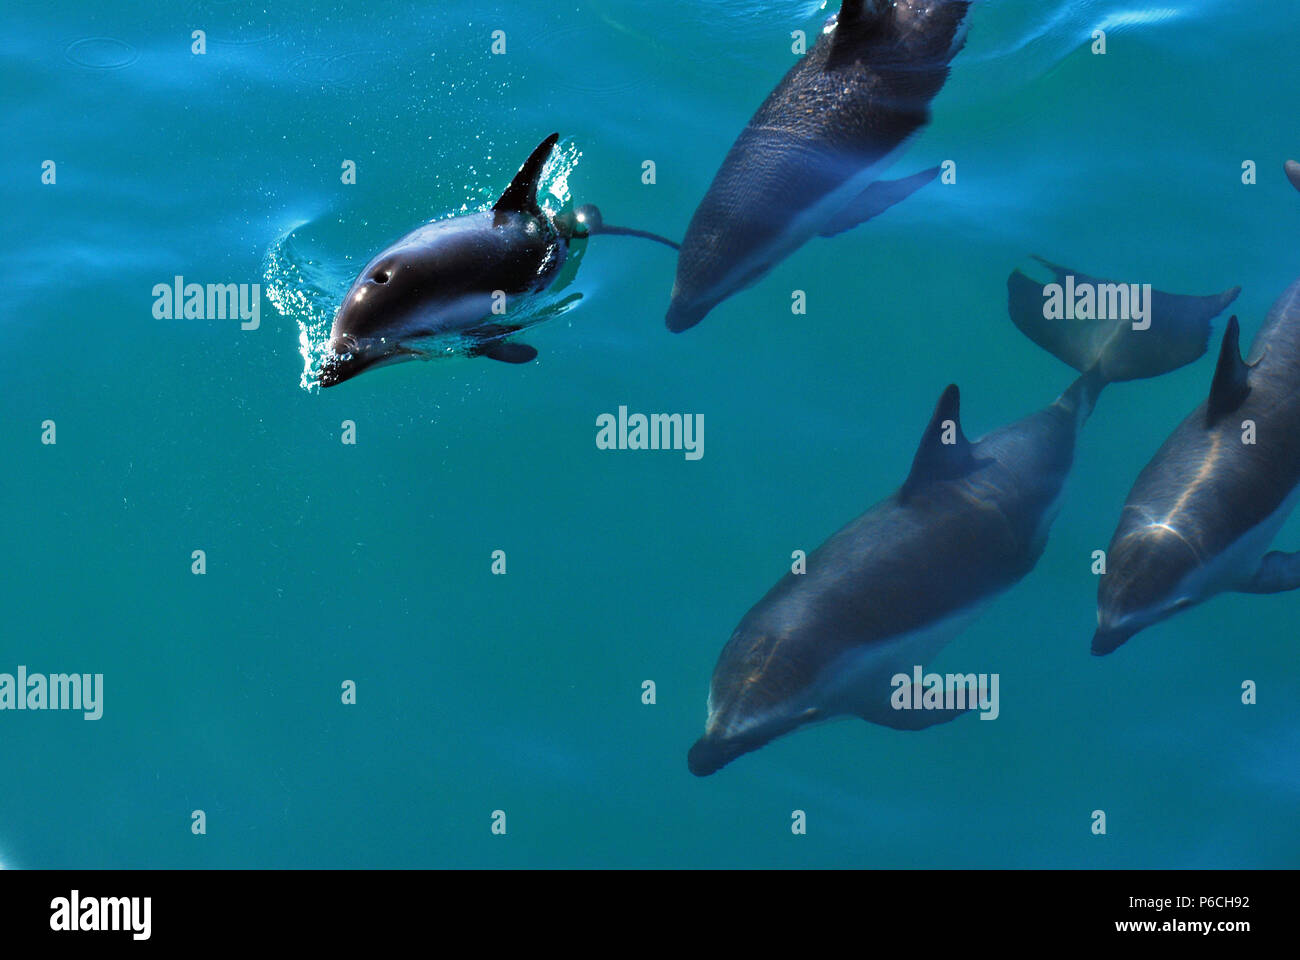 Dolphins jumping in ocean Stock Photo